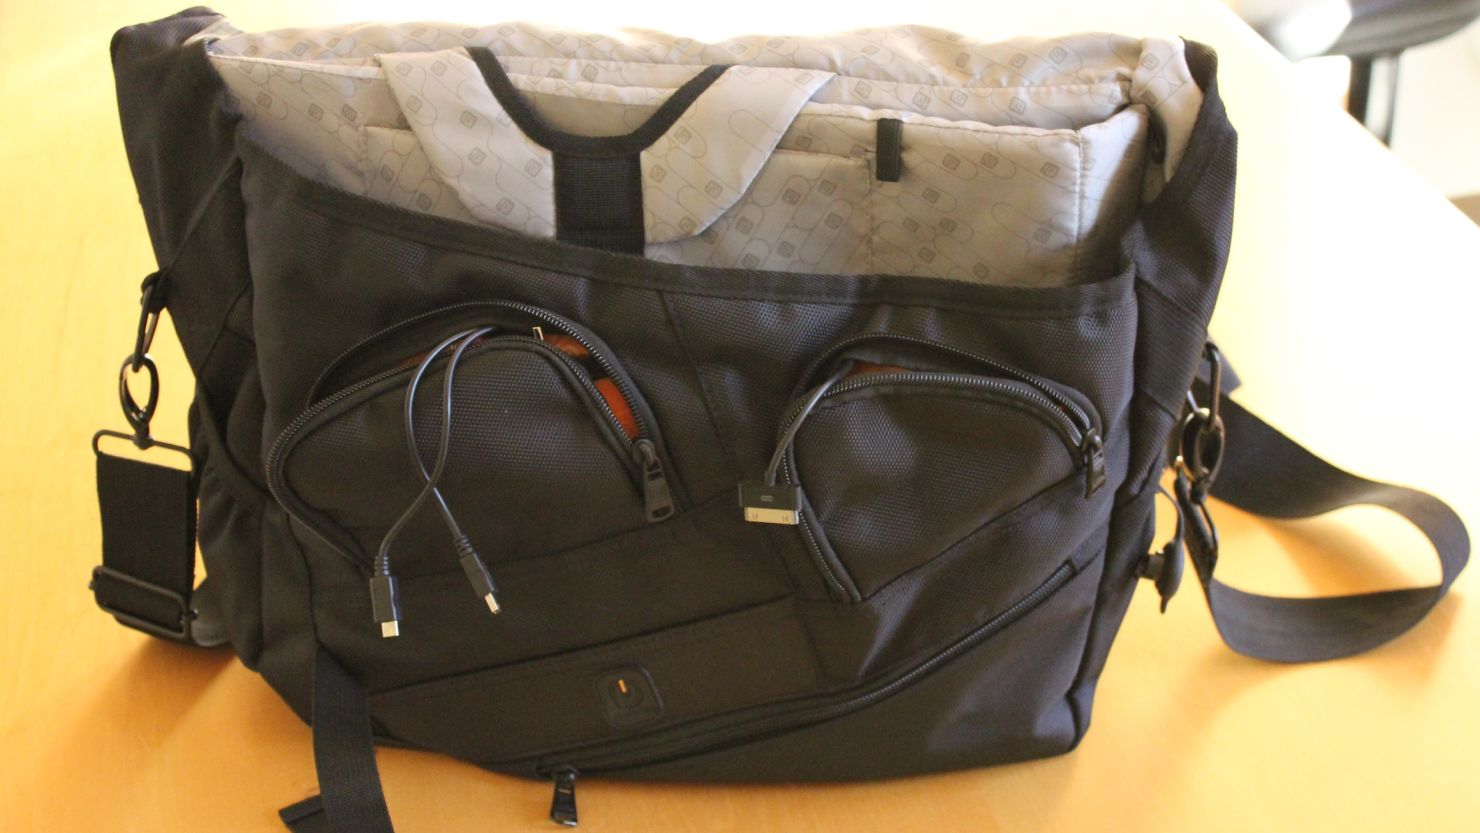 The Powerbag comes with a battery and standard wires for charging gadgets.